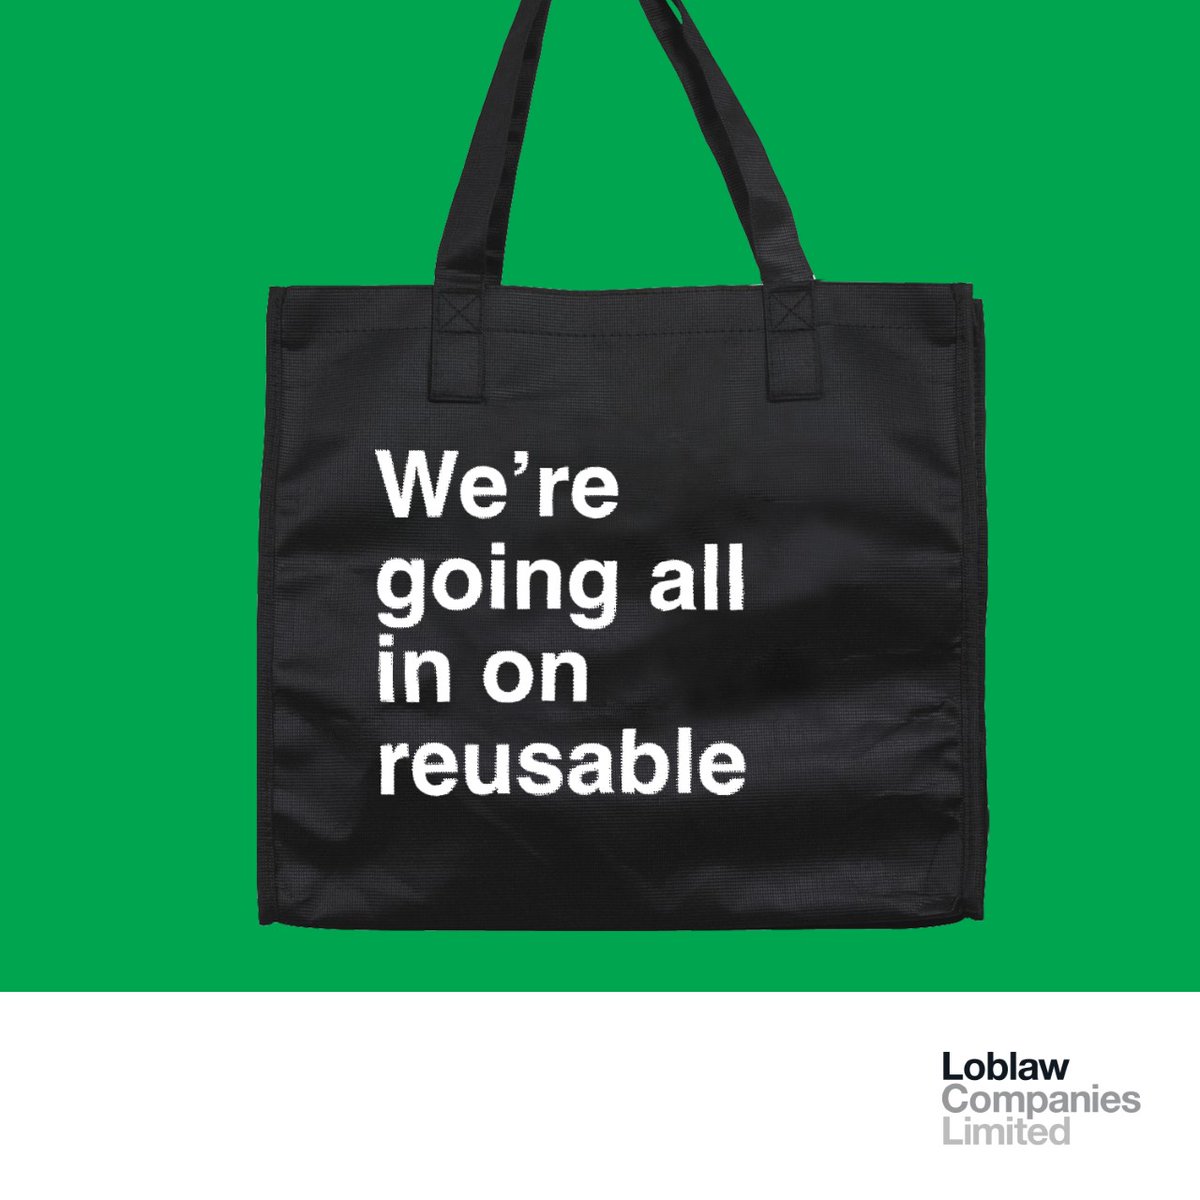 Today, we announced plans to eliminate all single-use plastic shopping bags from our stores across the country by April 2023. Read more under our 2021 ESG Report: loblaw.ca/en/responsibil…